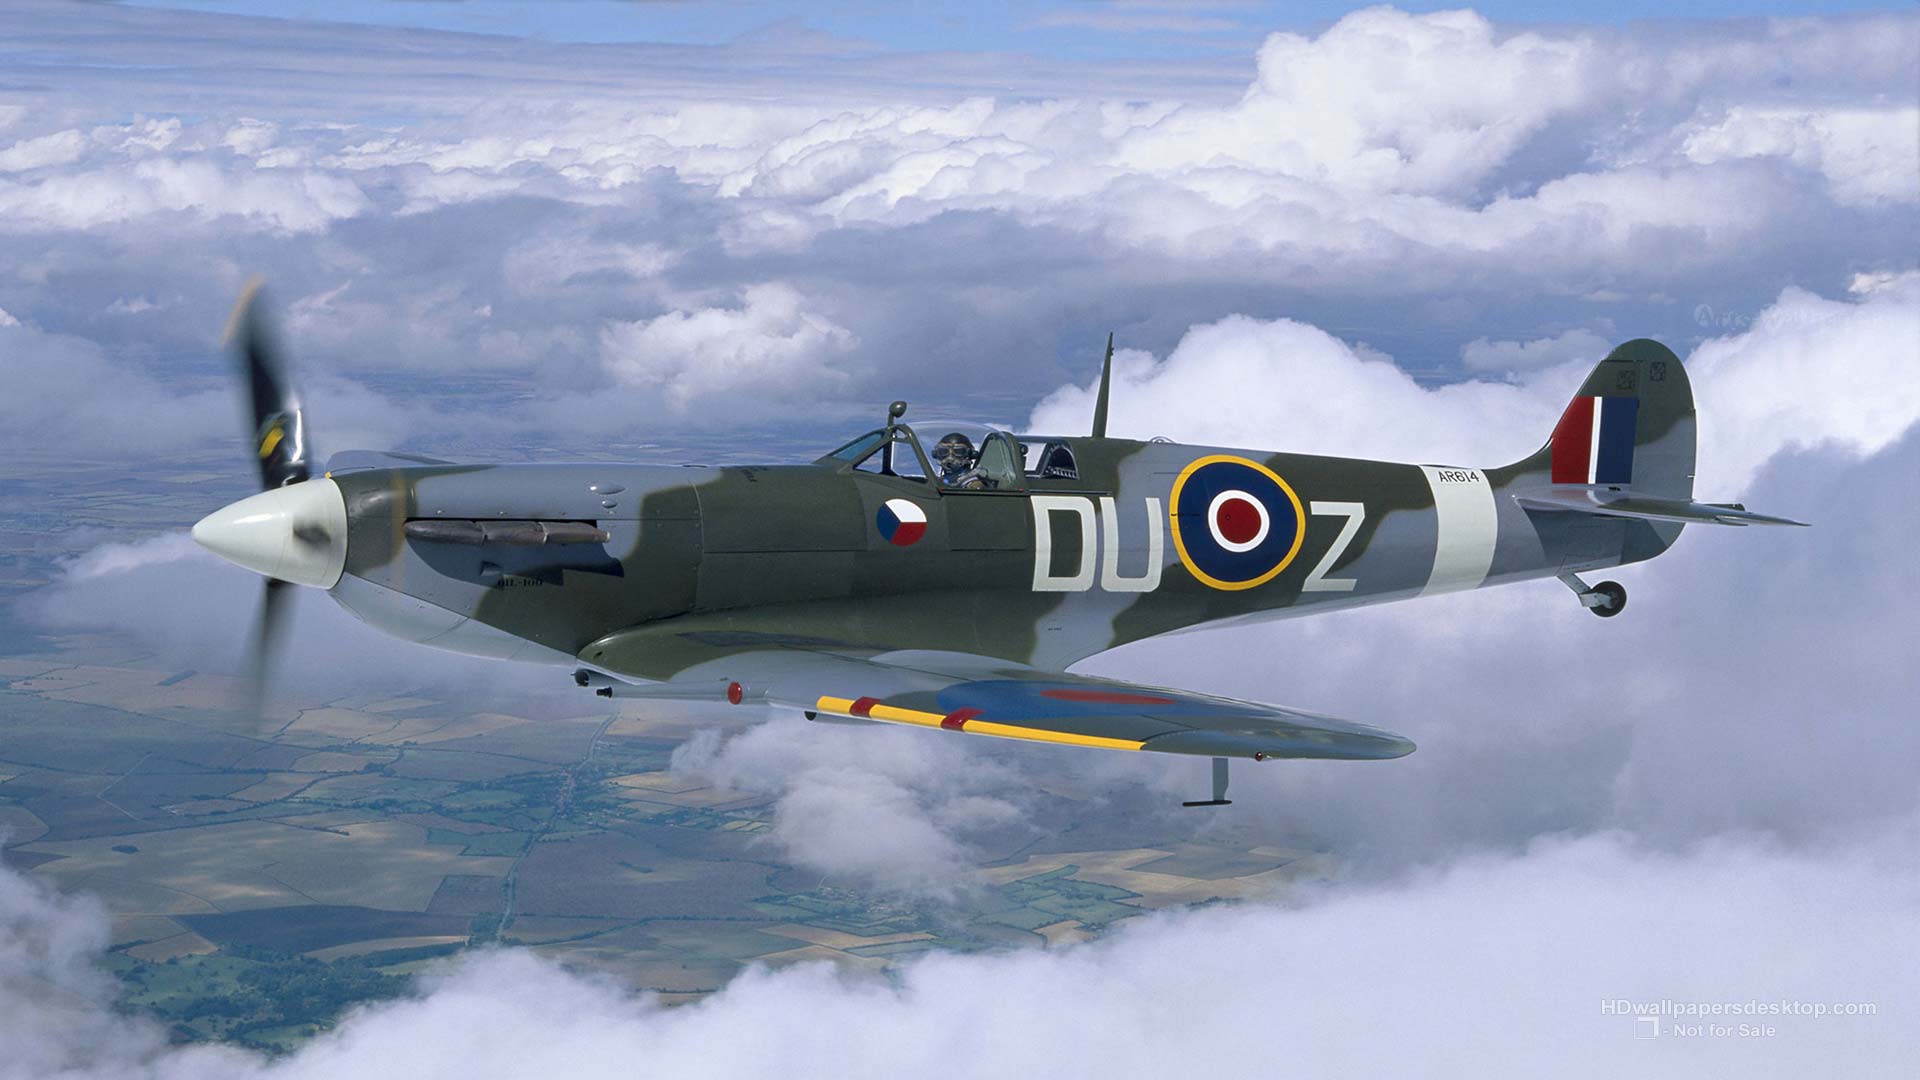 Military Planes Spitfire World War Plane With Resolutions